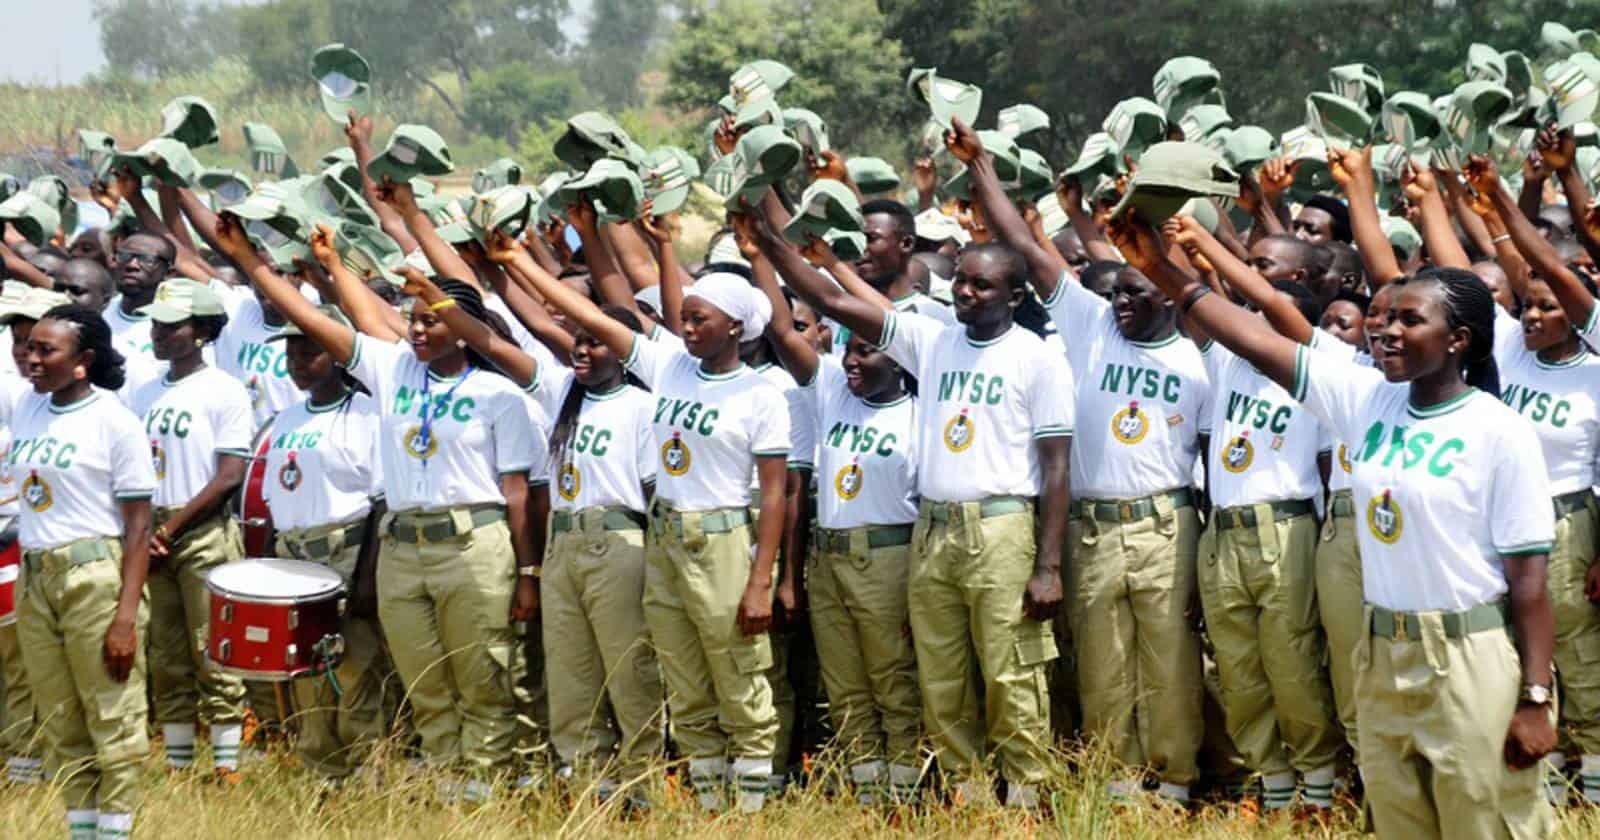 NYSC Camp Registration Requirements